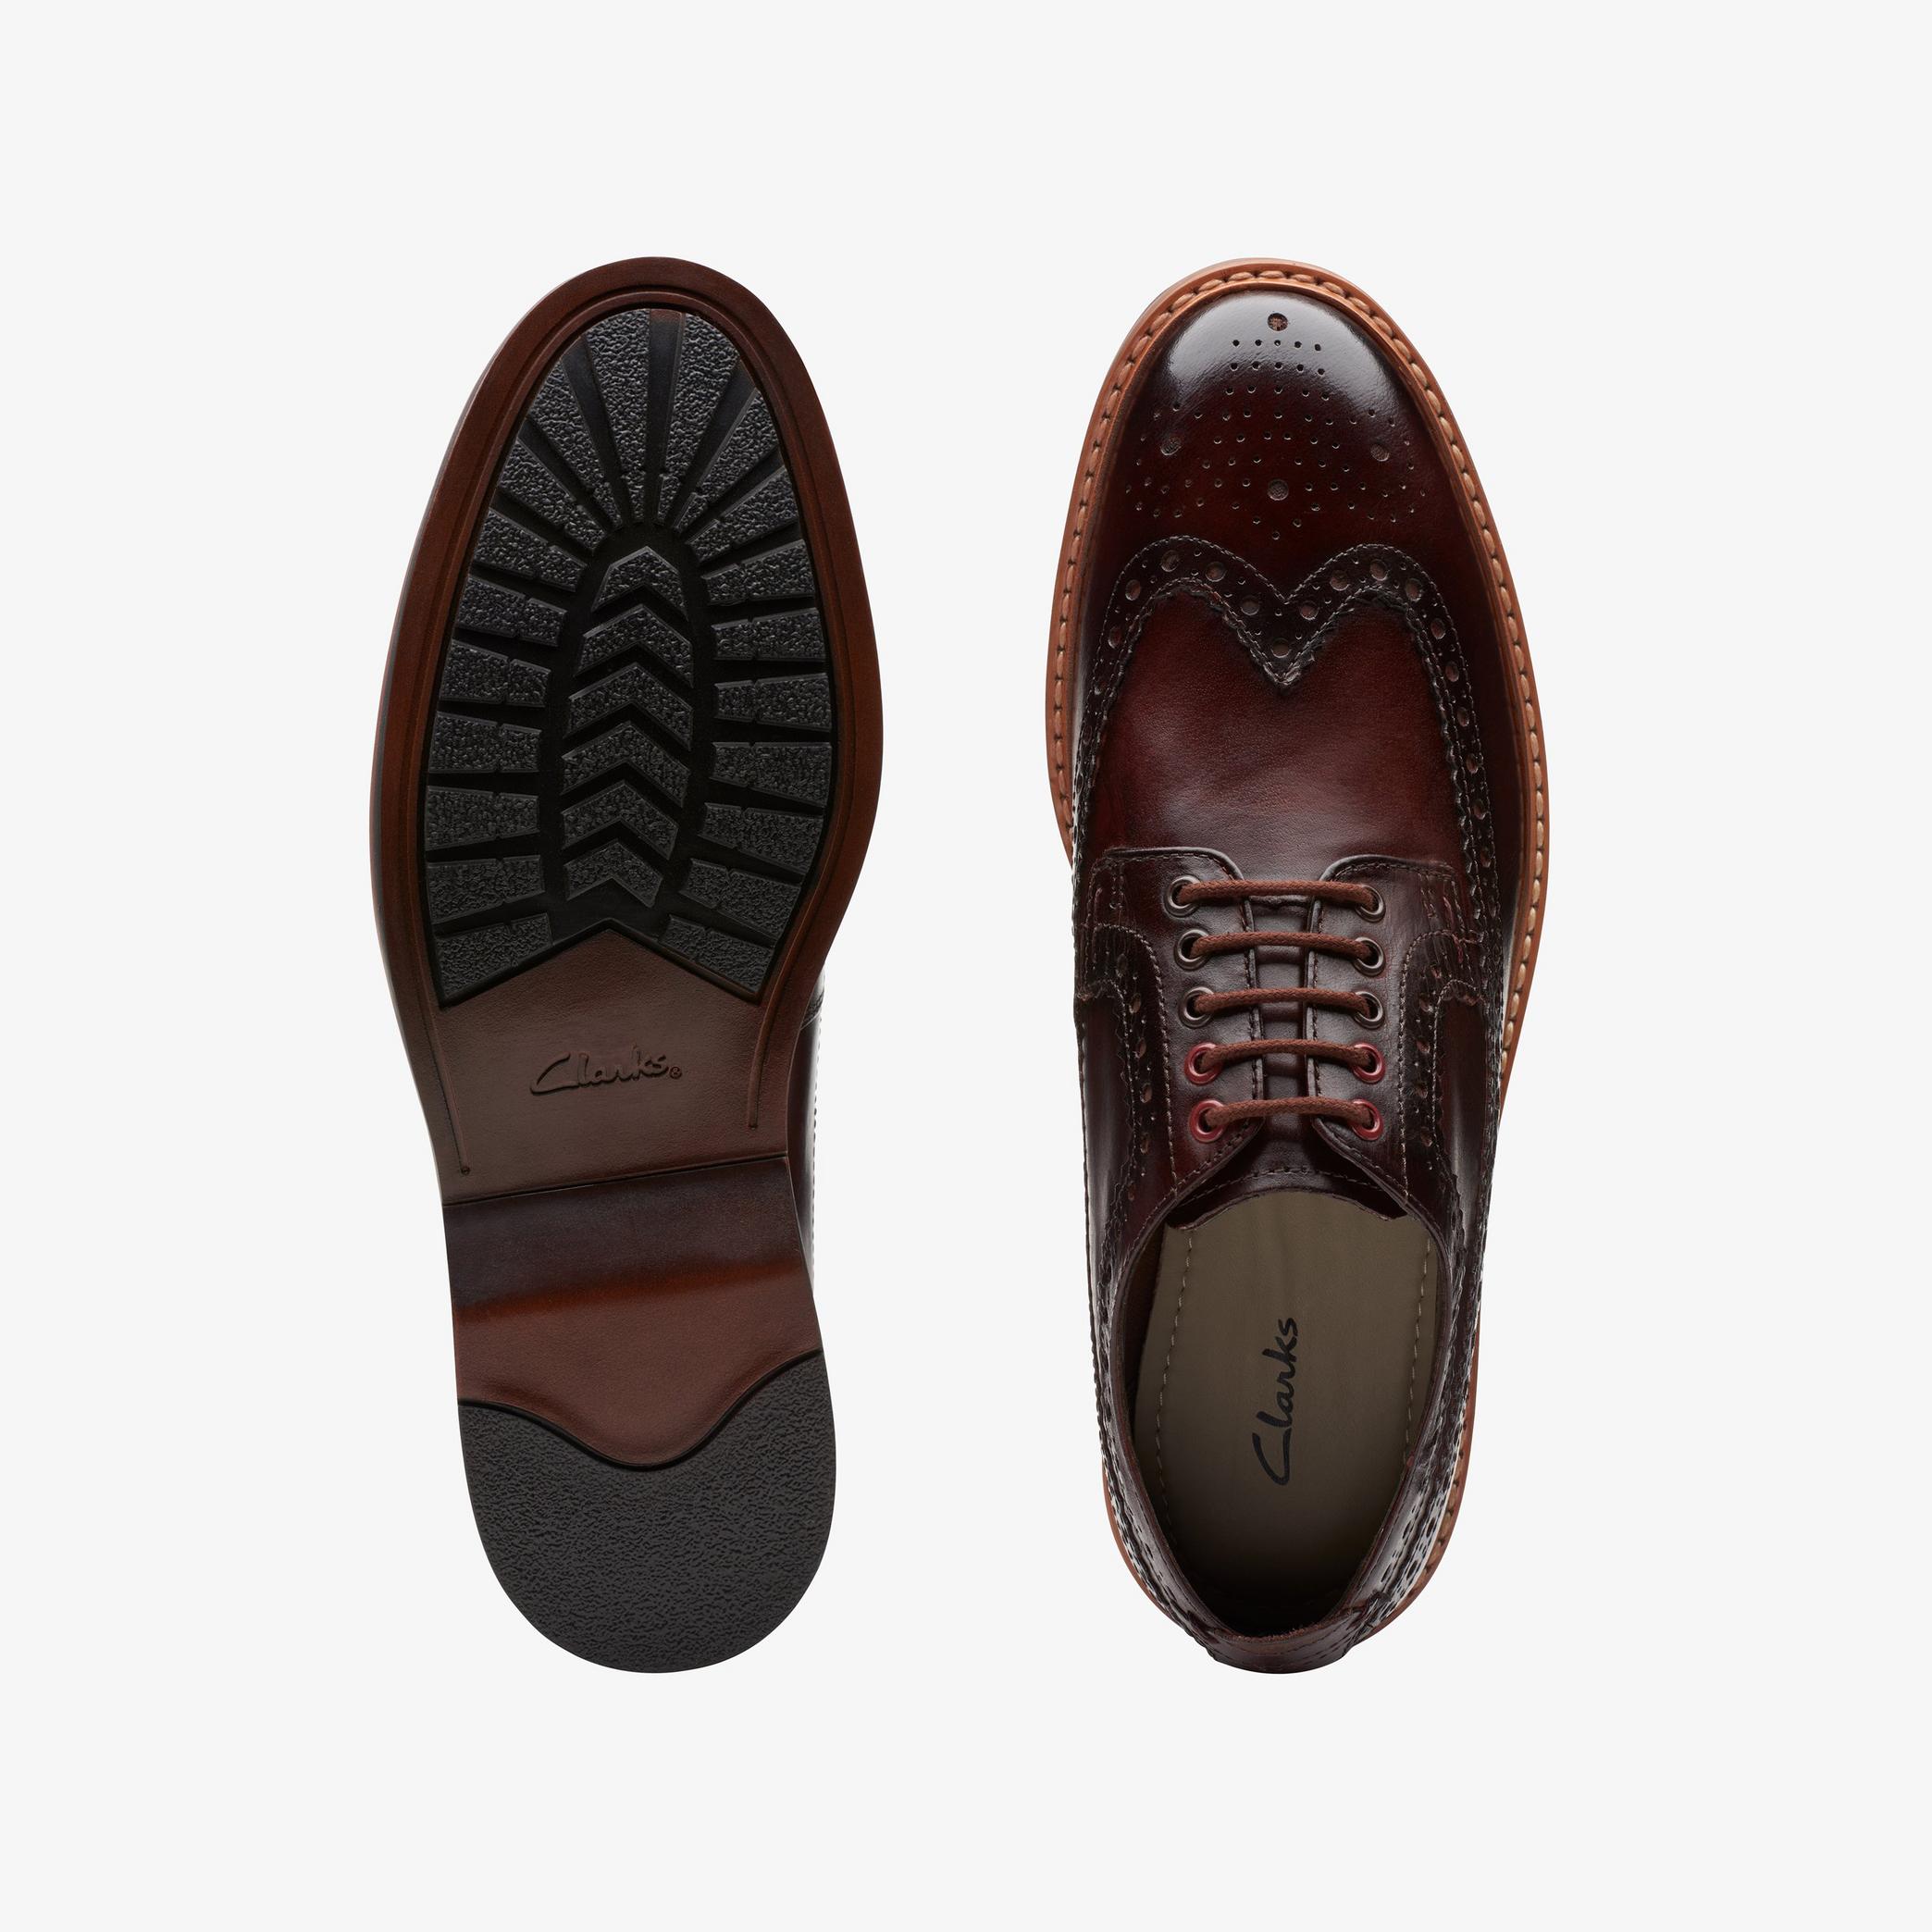 Pitney Limit Chestnut Leather Brogues, view 6 of 6